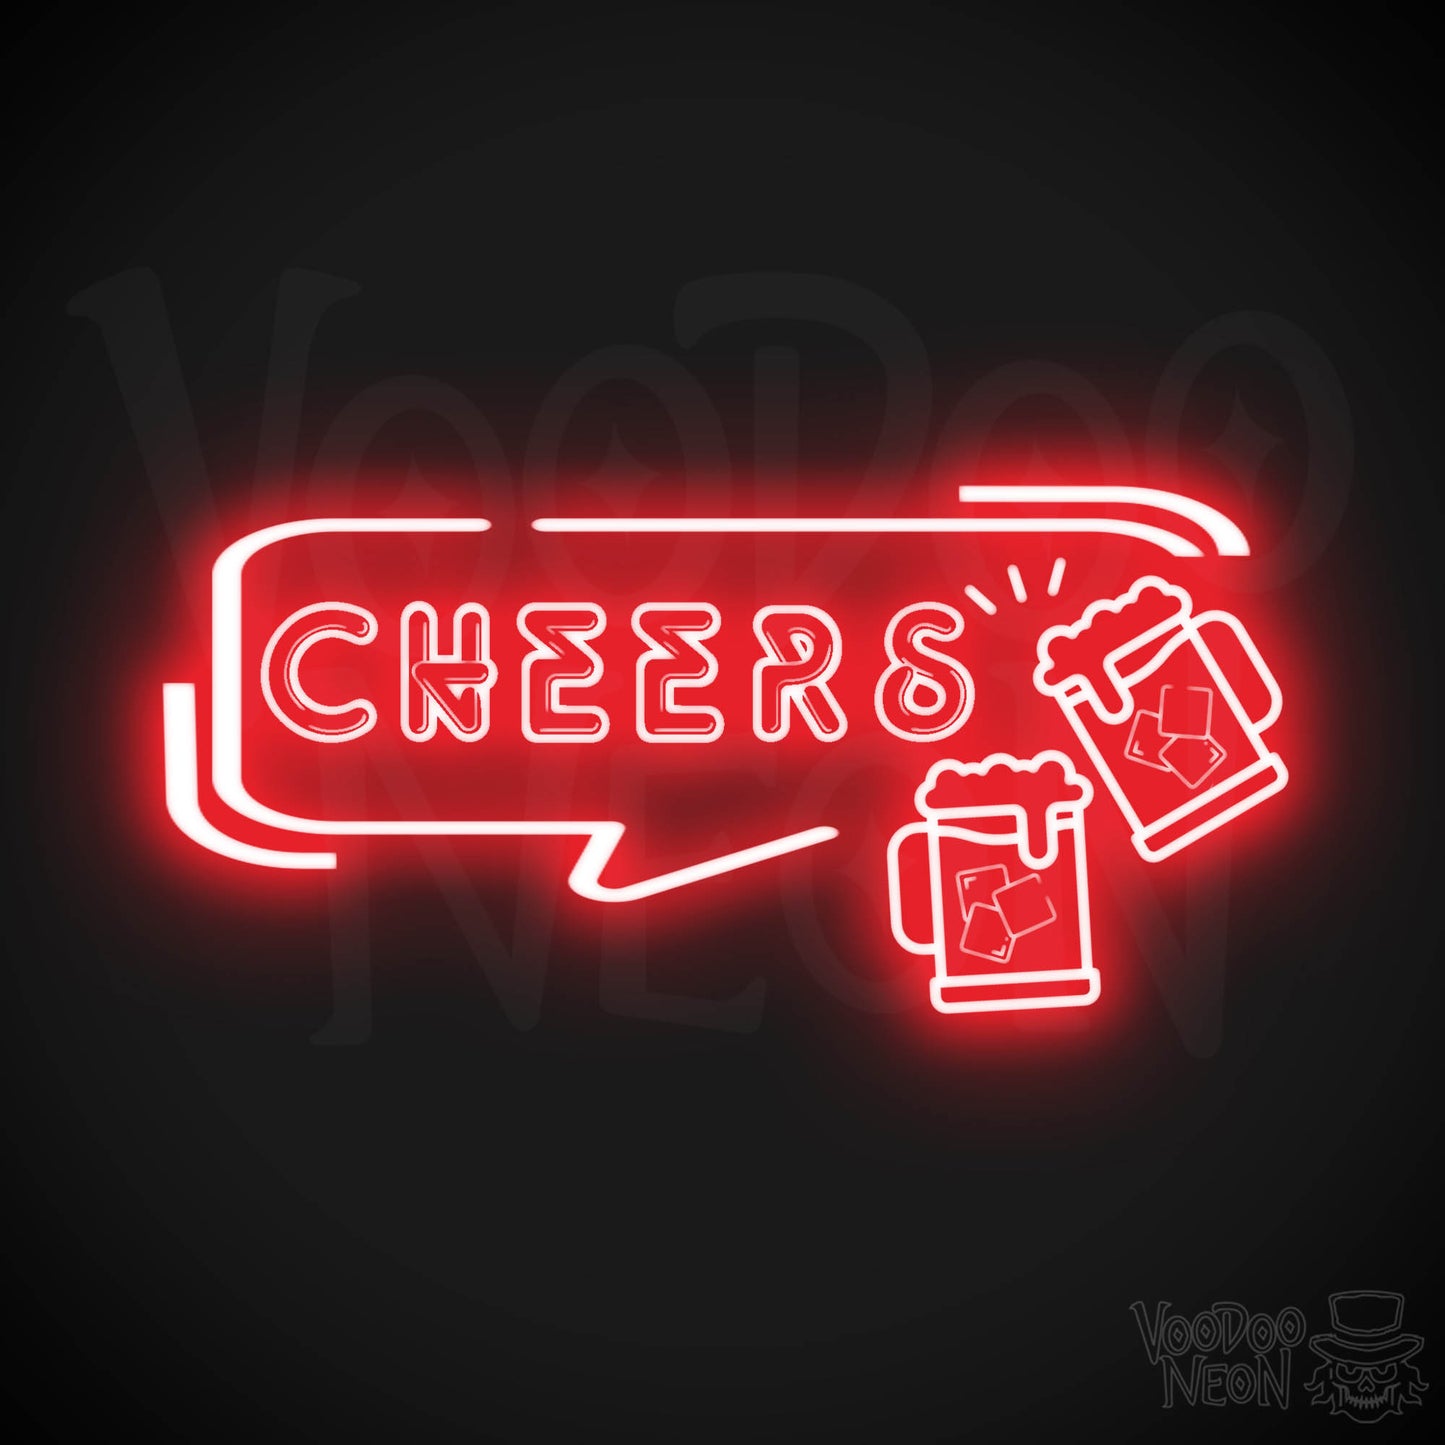 Cheers Neon Sign - Neon Cheers Bar Sign - LED Neon Wall Art - Color Red